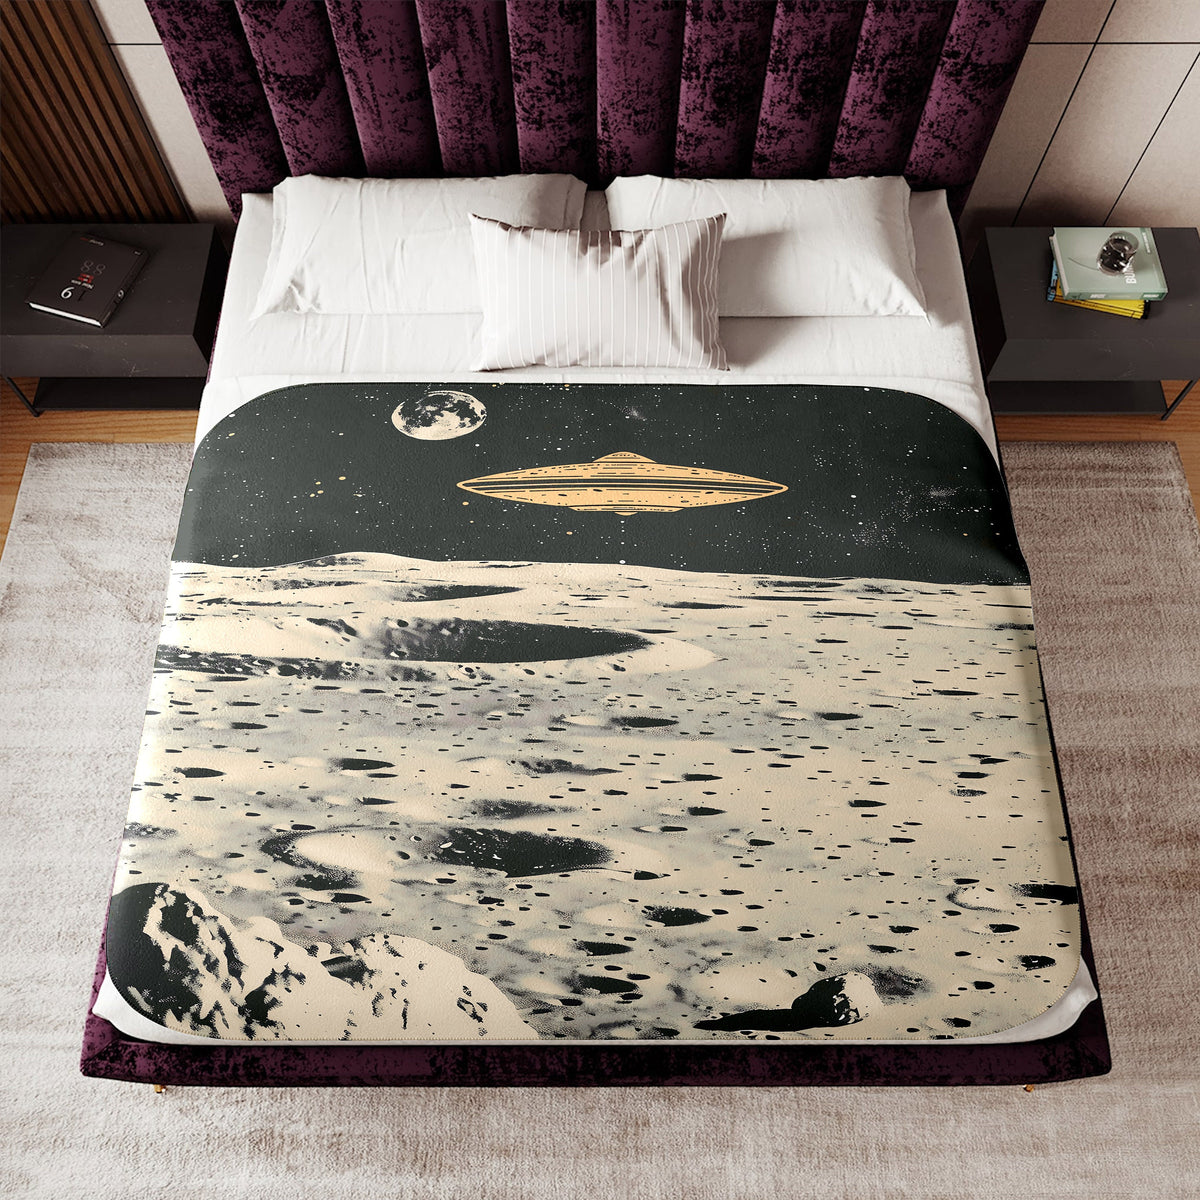 a bed with a picture of the moon on it